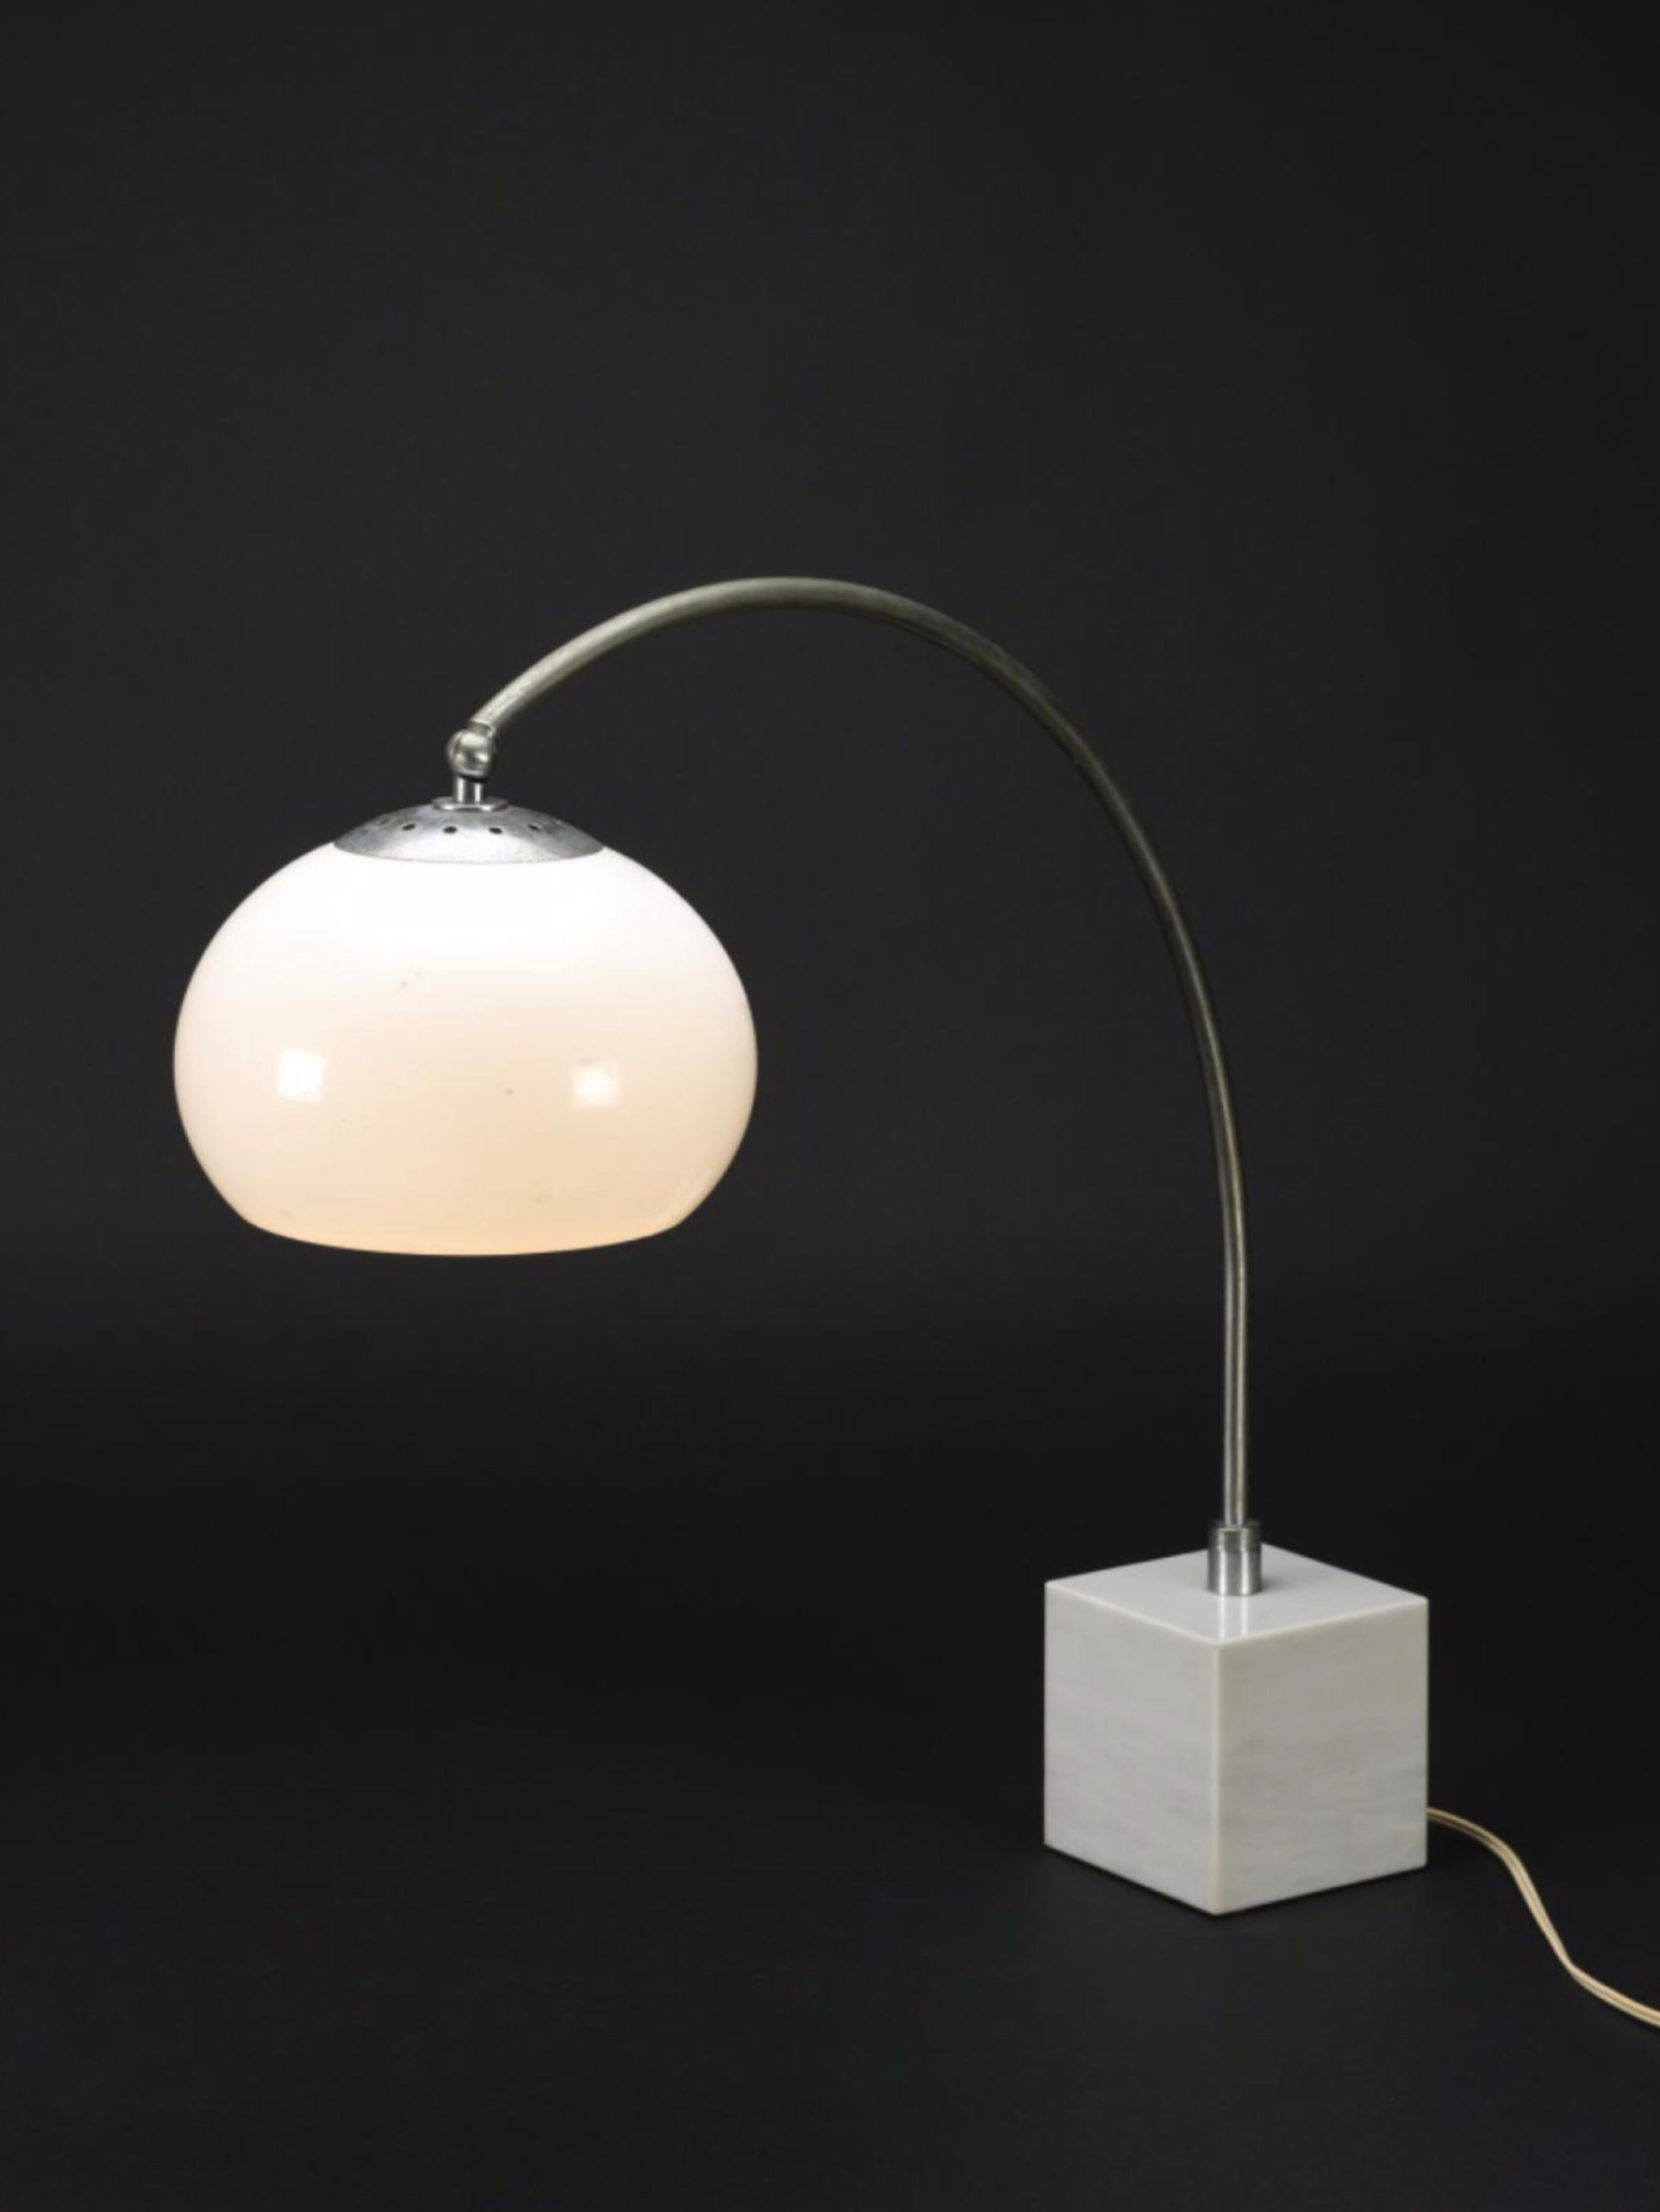 Table lamp by Goffredo Reggiani, Italy 60-70.
Material: Marble, opaline glass, Alu.
Perfect condition.
For an interior seventies, 1960, 1950
In the style of Willy Rizzo, Knoll, Ico Parisi, Romeo Rega, Eames. Raymon Loewy, Guzzini, Joe COLOMBO,